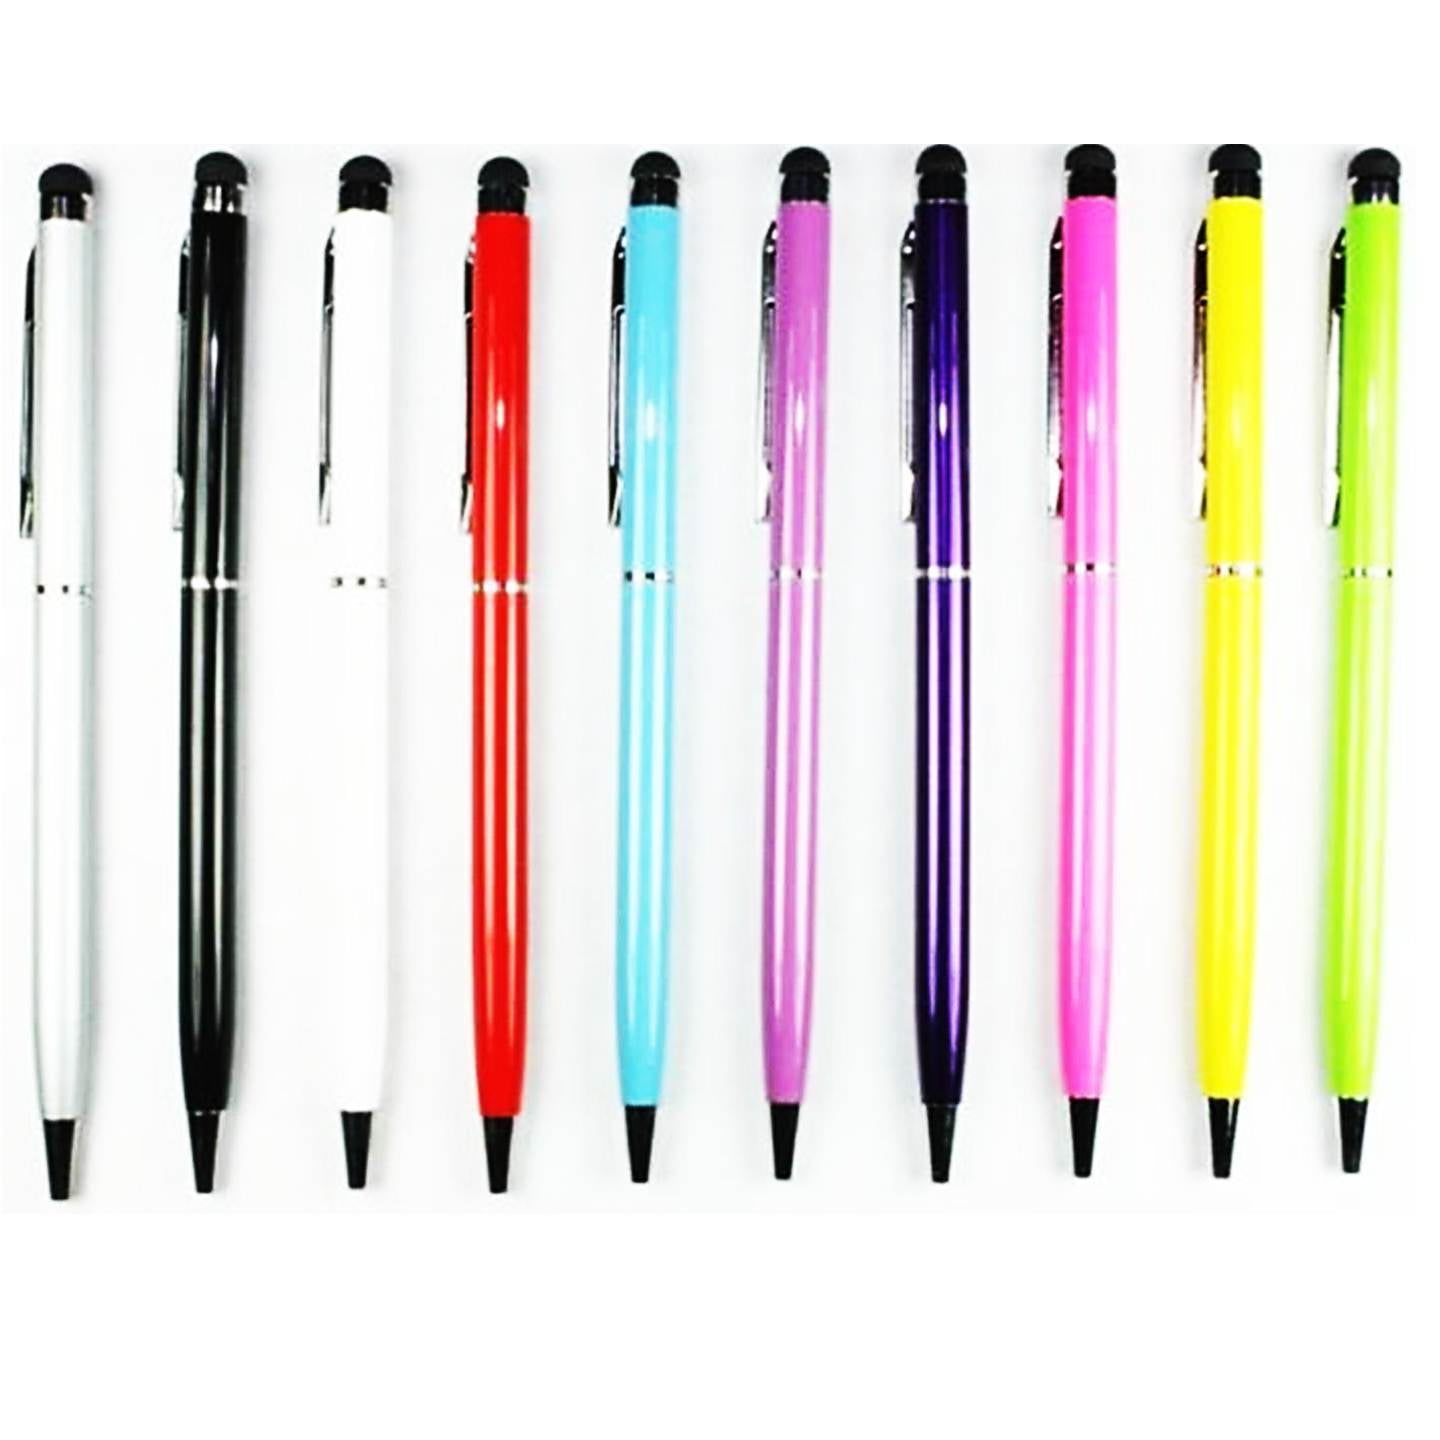 10Packs 2in1 Touch Screen Stylus & Ballpoint Pen For iphone Smartphone Tablet PC 